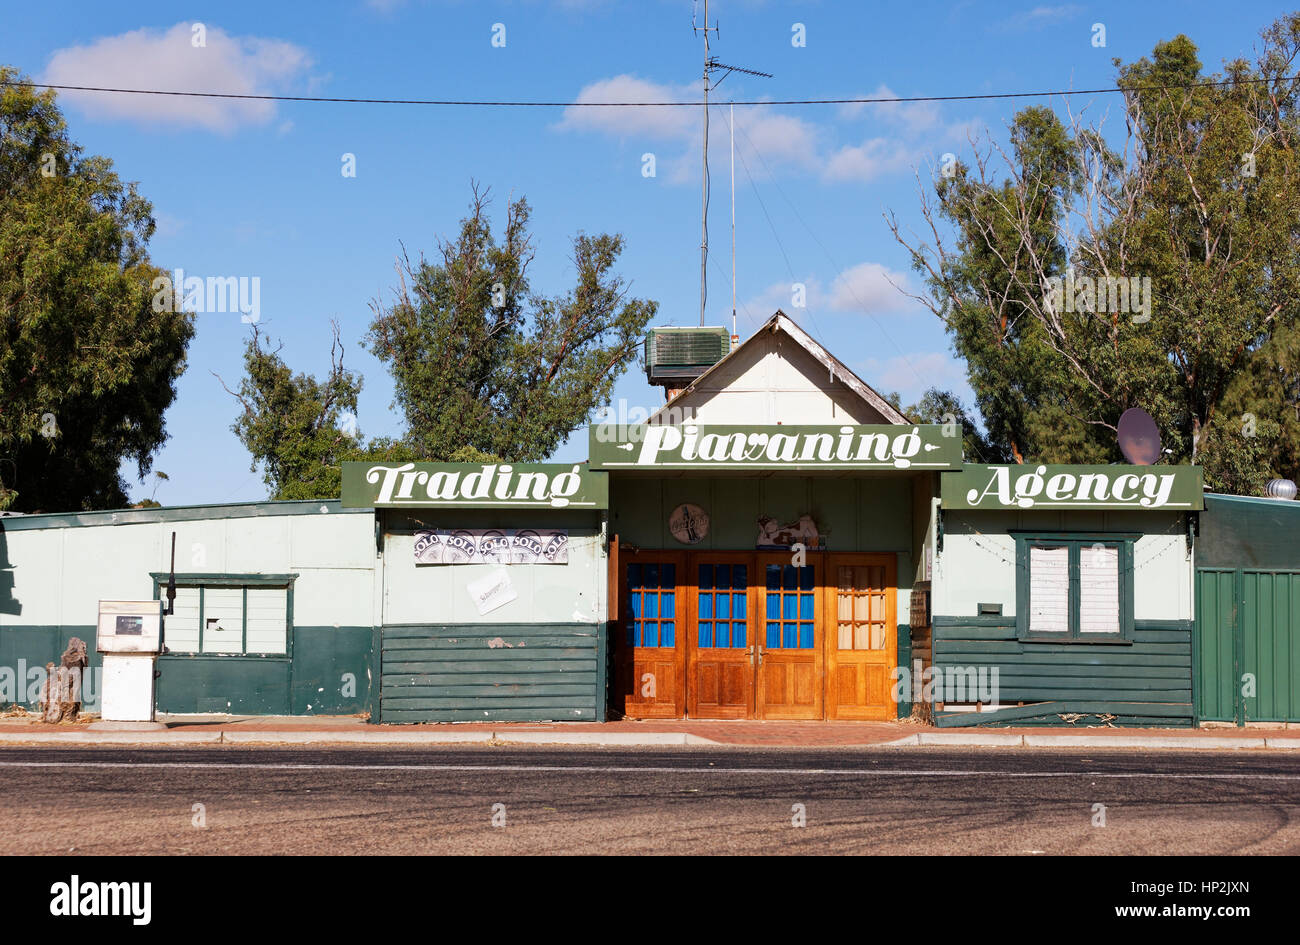 Country town shop(trading agency), Piawaning, Western Australia. Stock Photo